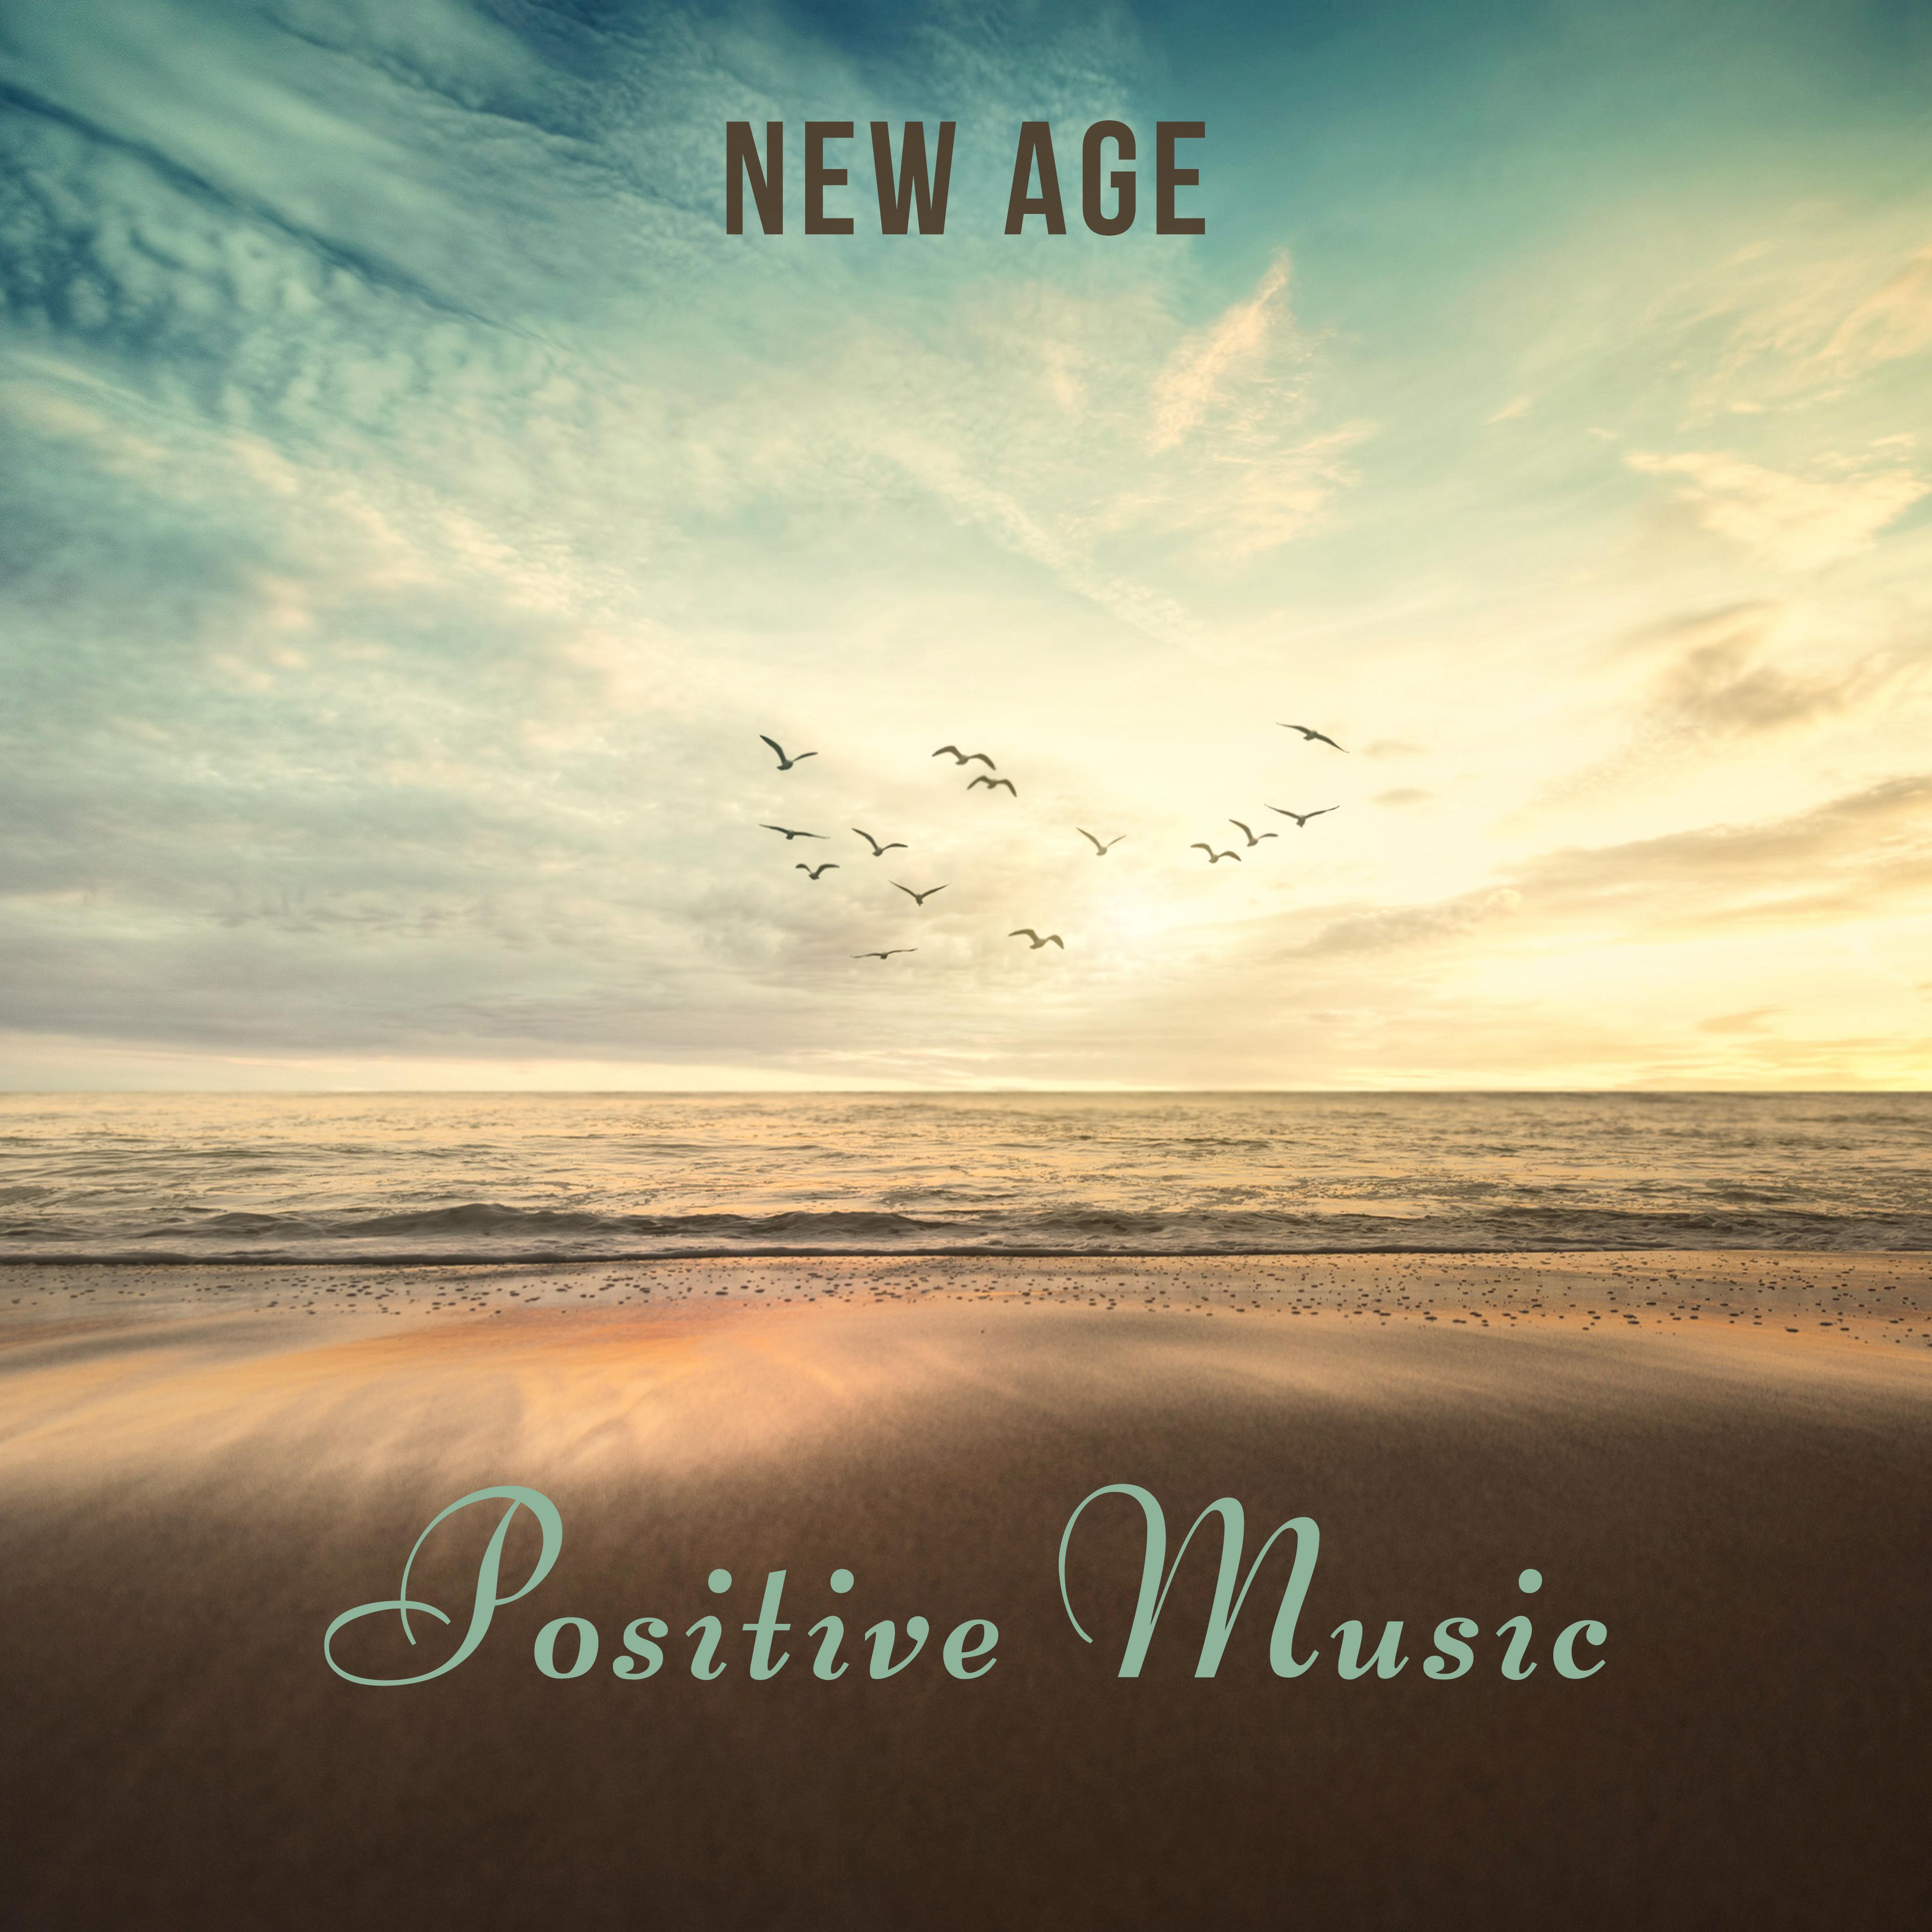 New Age Positive Music  Relaxing Sounds to Calm Mind, Harmony Music, Inner Silence, Peaceful Waves, Soothing Songs